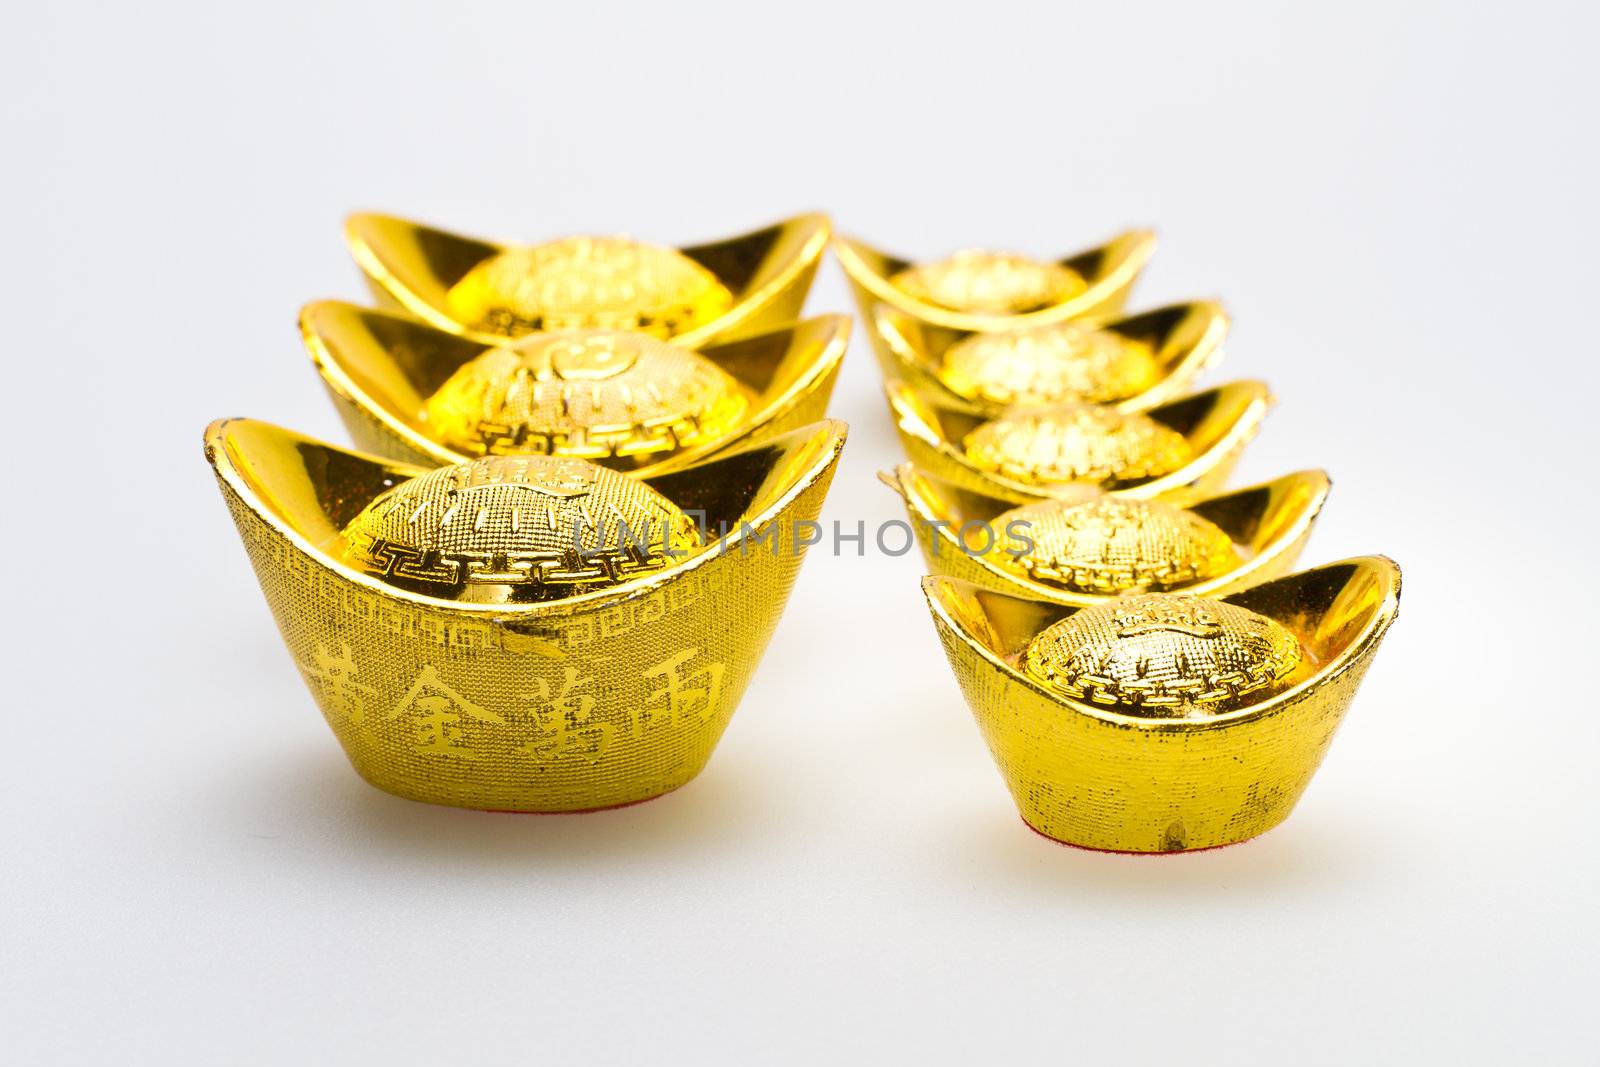 Chinese gold Ingots of various size lie up on white surface